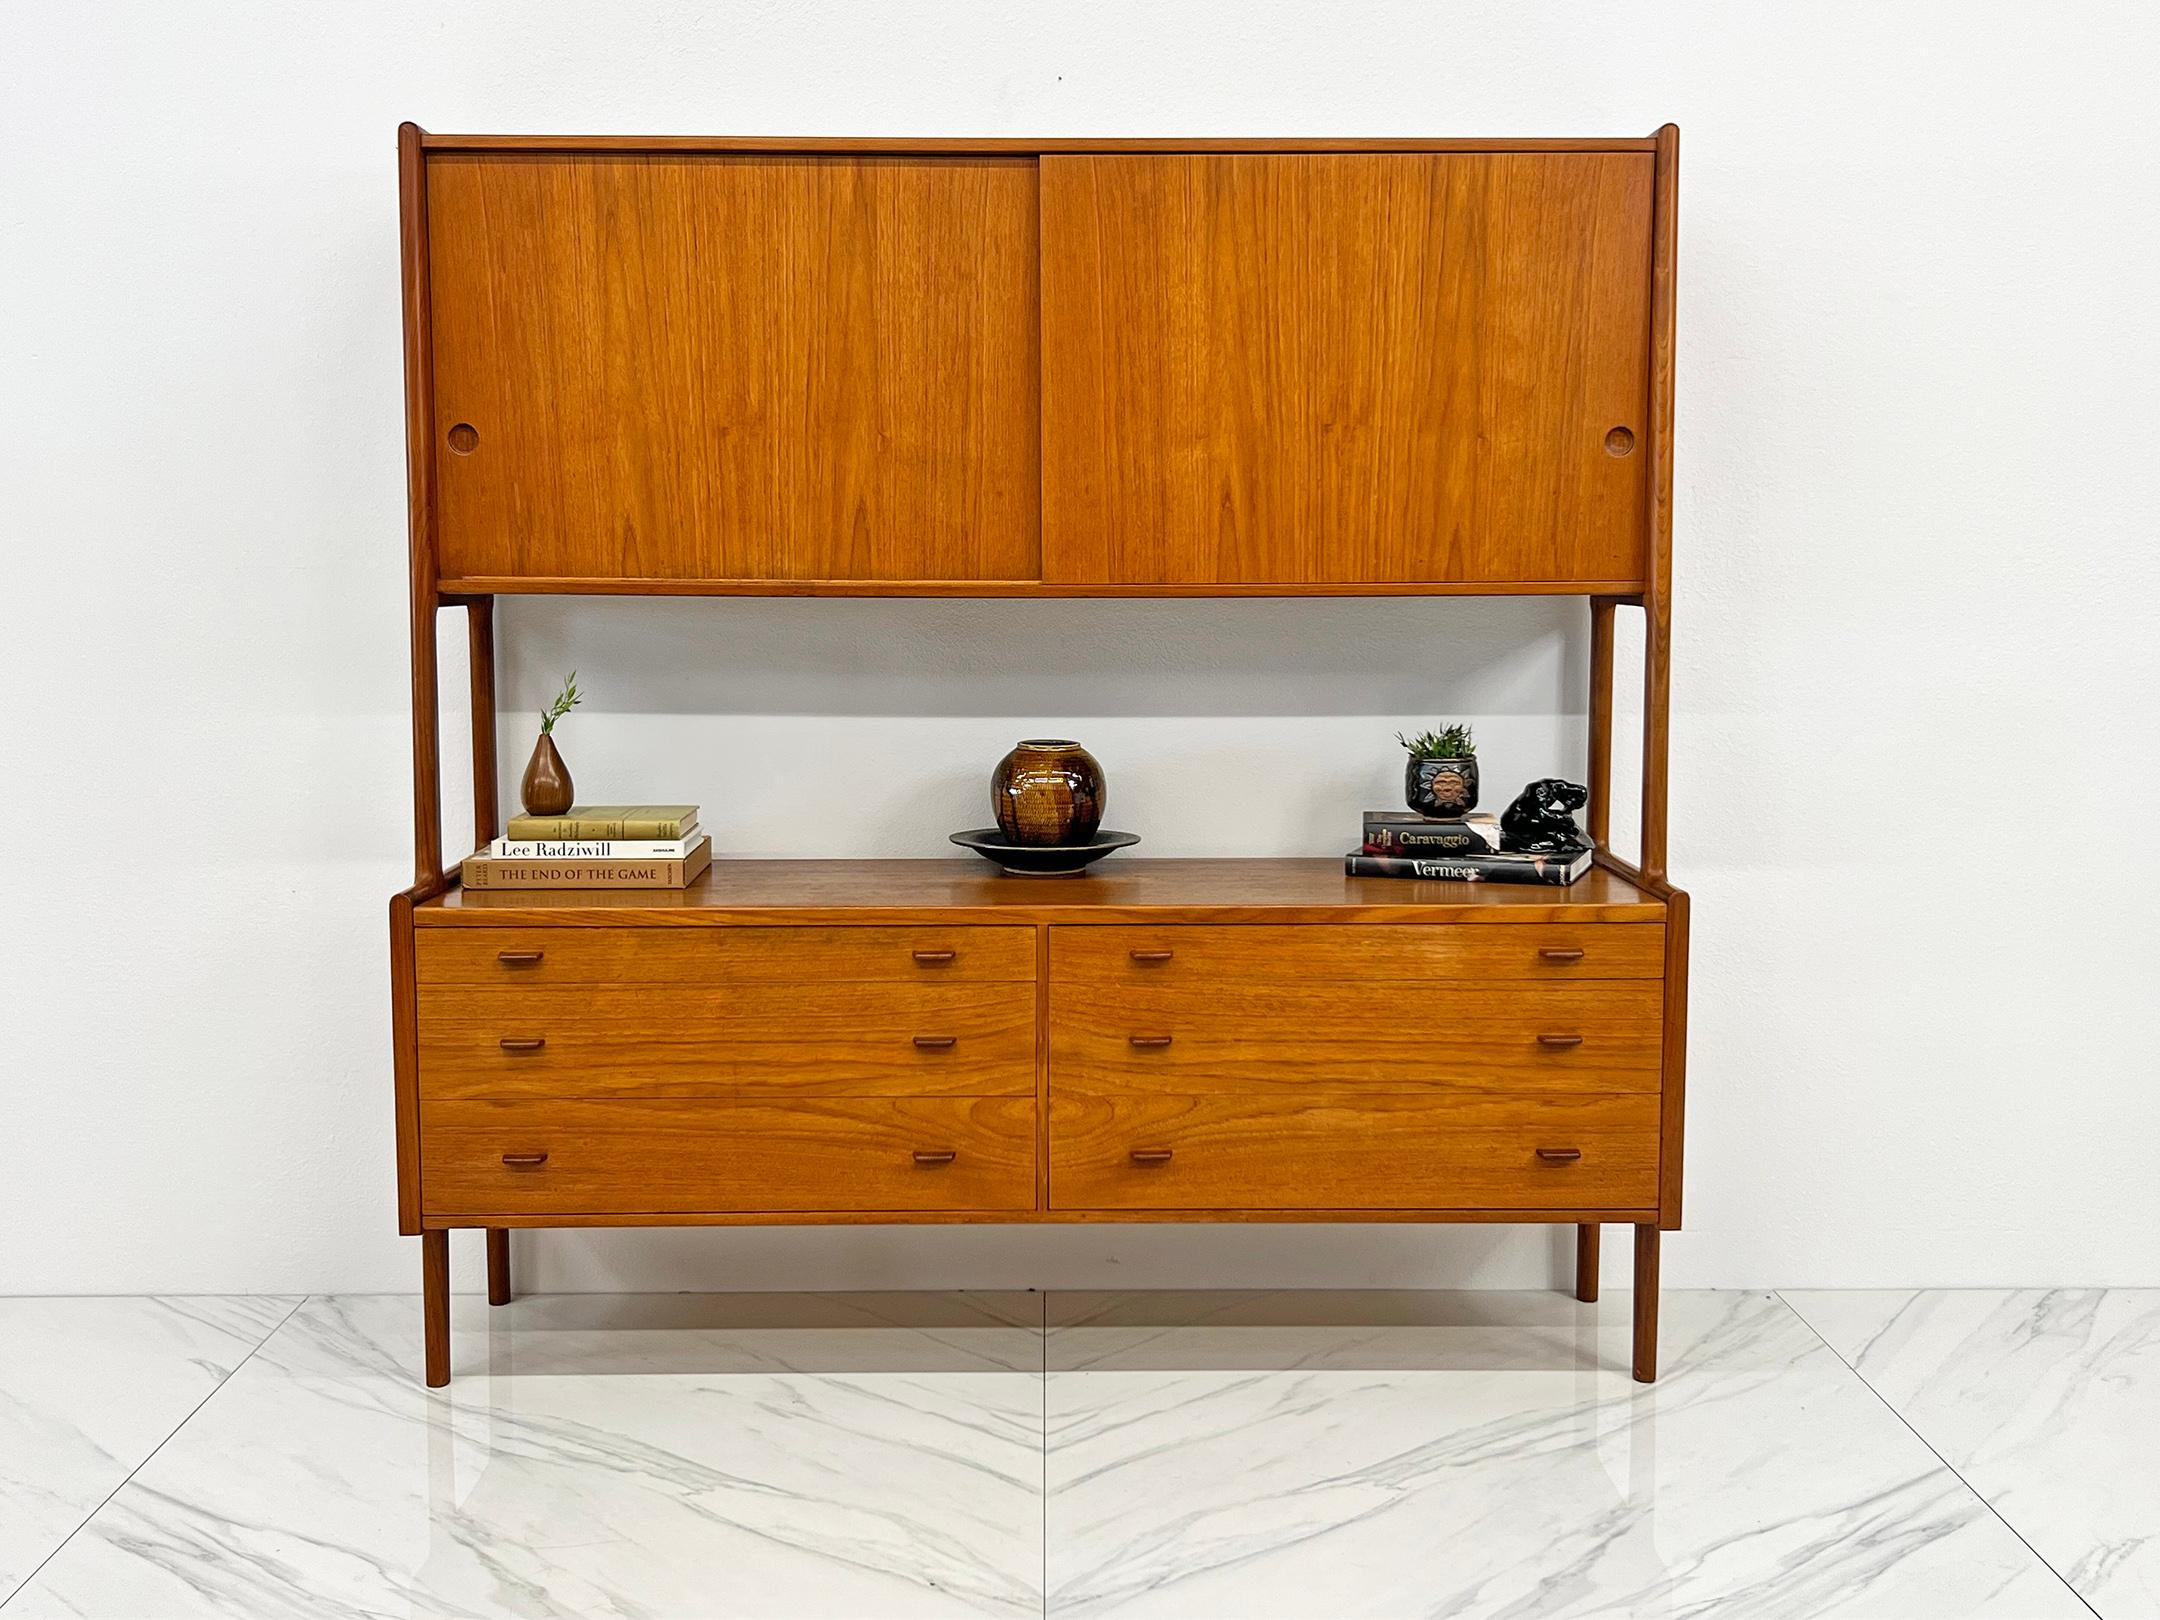 Step into the mid-century magic with this Hans Wegner-designed wall unit from Ry Mobler, a true vintage gem born on April 28, 1958 (it's birthday is stamped on the back of the piece). Crafted in the timeless elegance of teak, this wall unit is yet